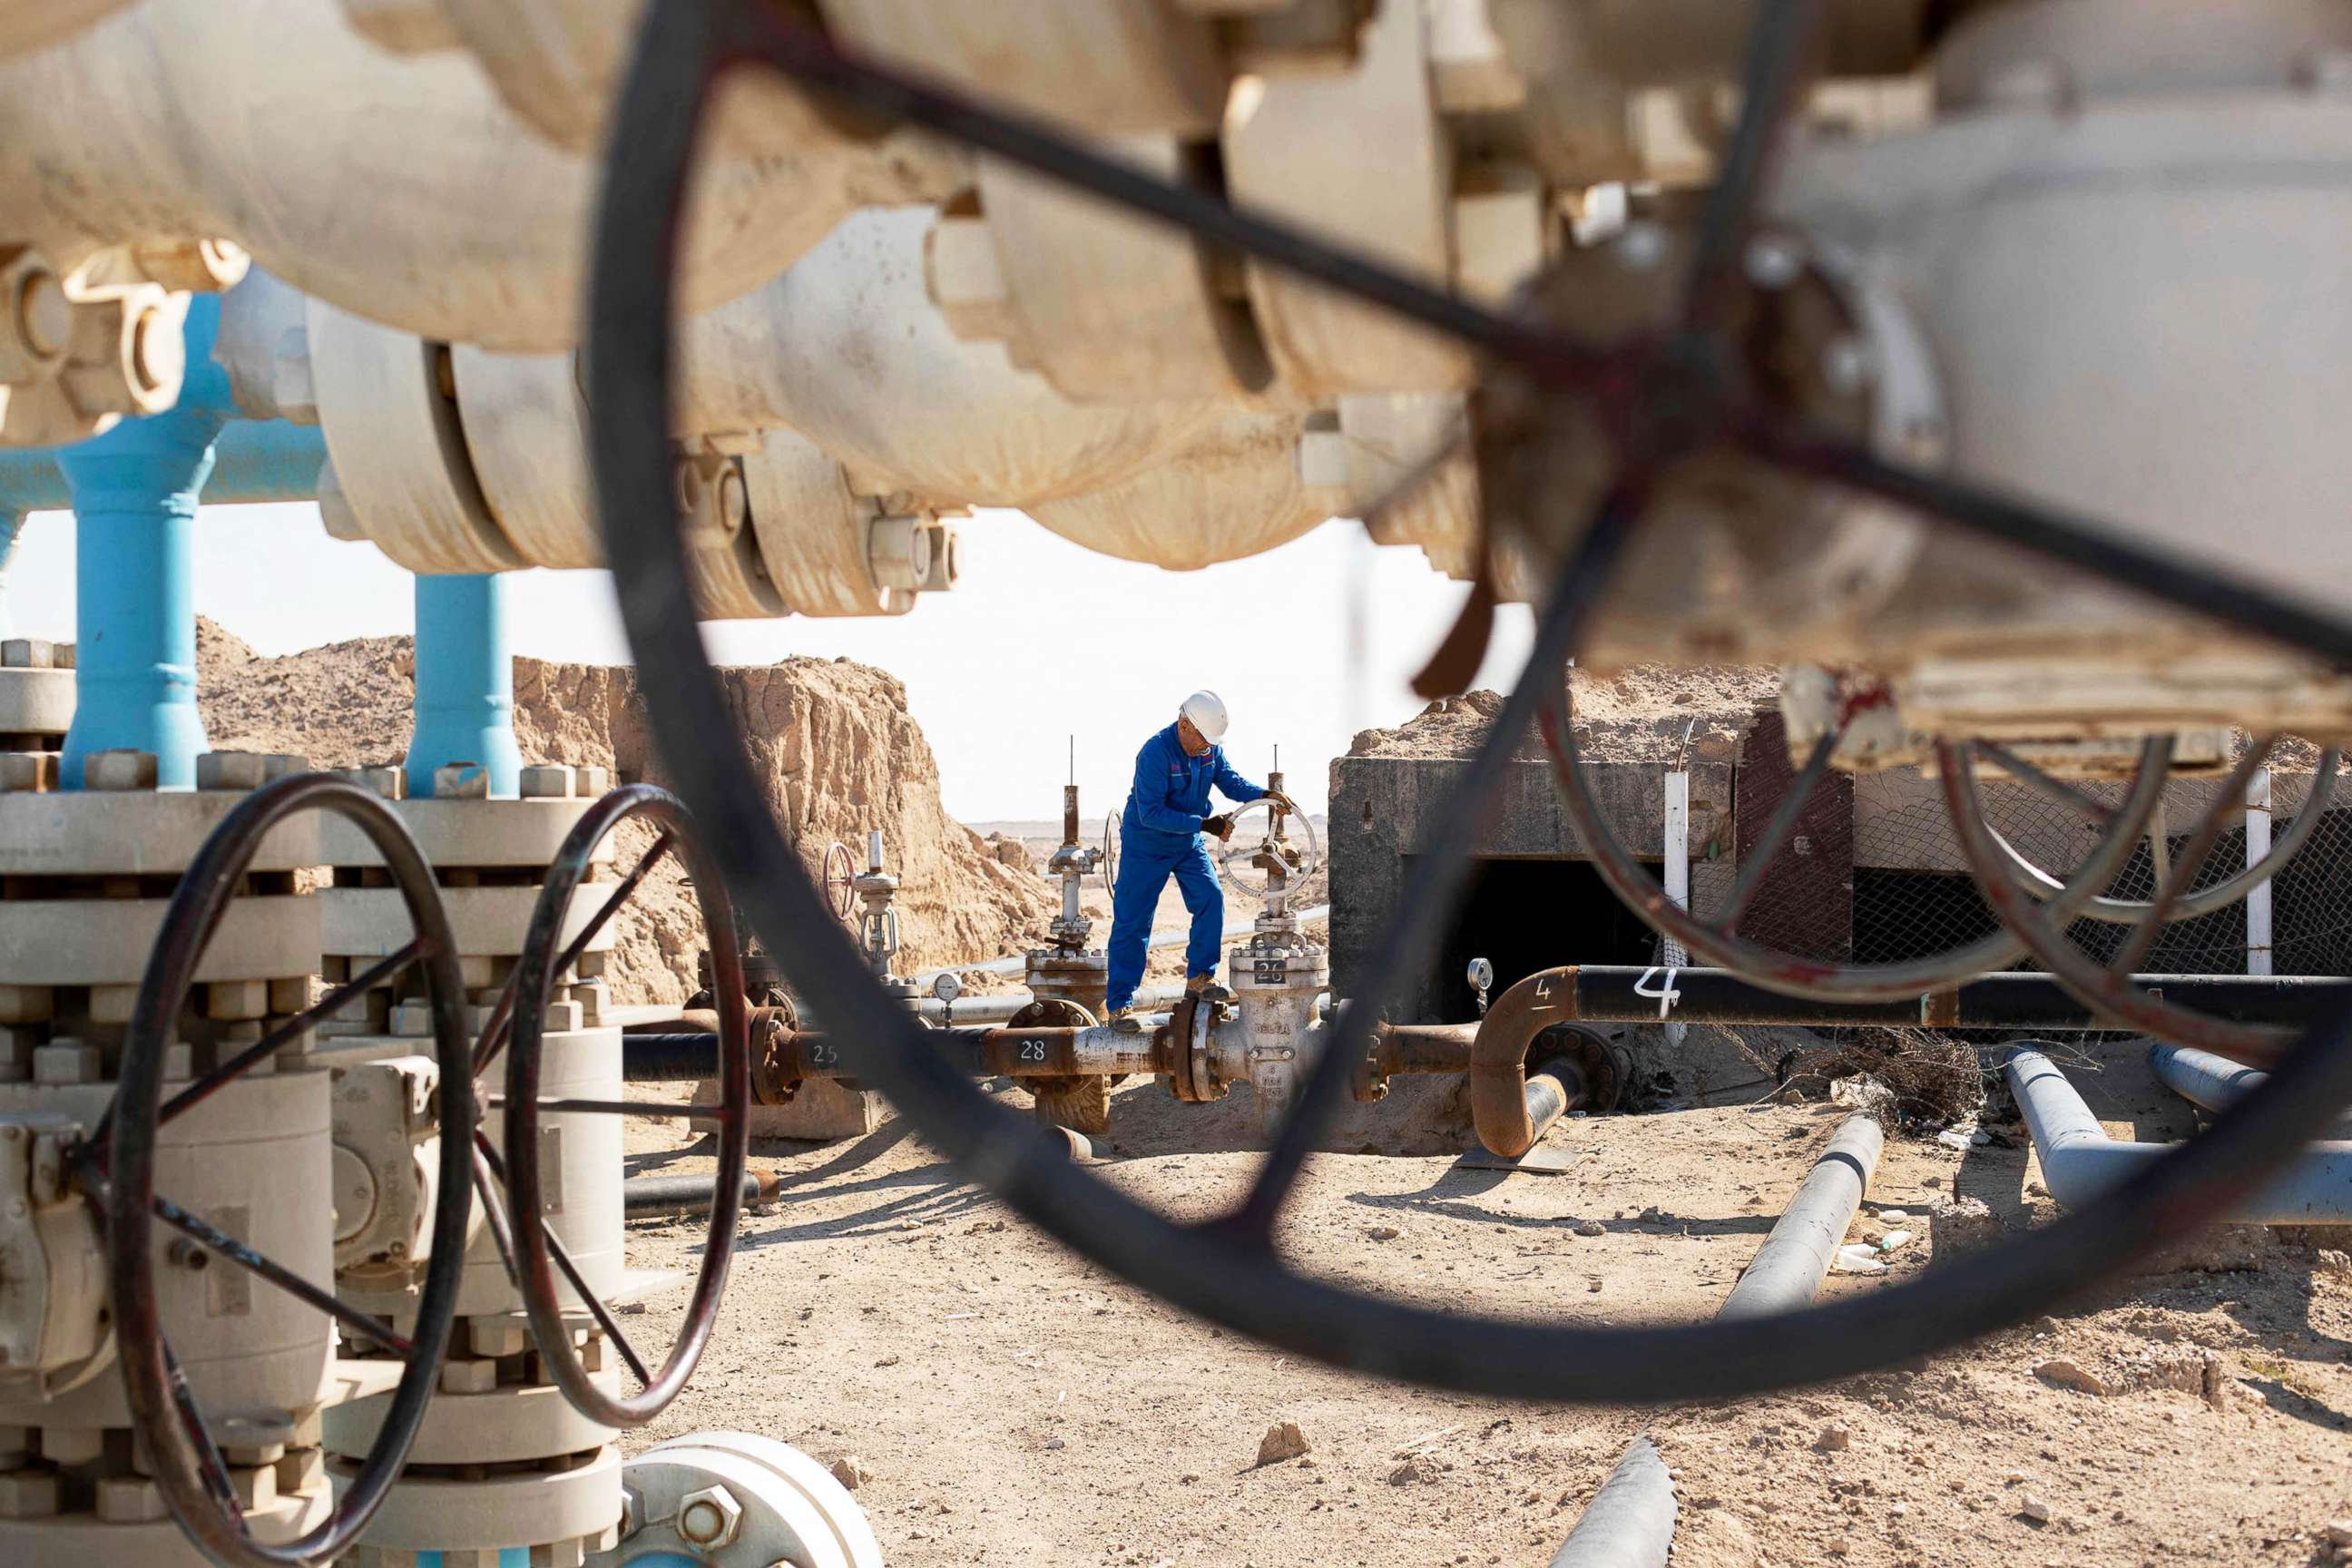 PHOTO: A technician works on a processing facility in Artawi, near Iraq's southern port city of Basra on Jan. 19, 2022.